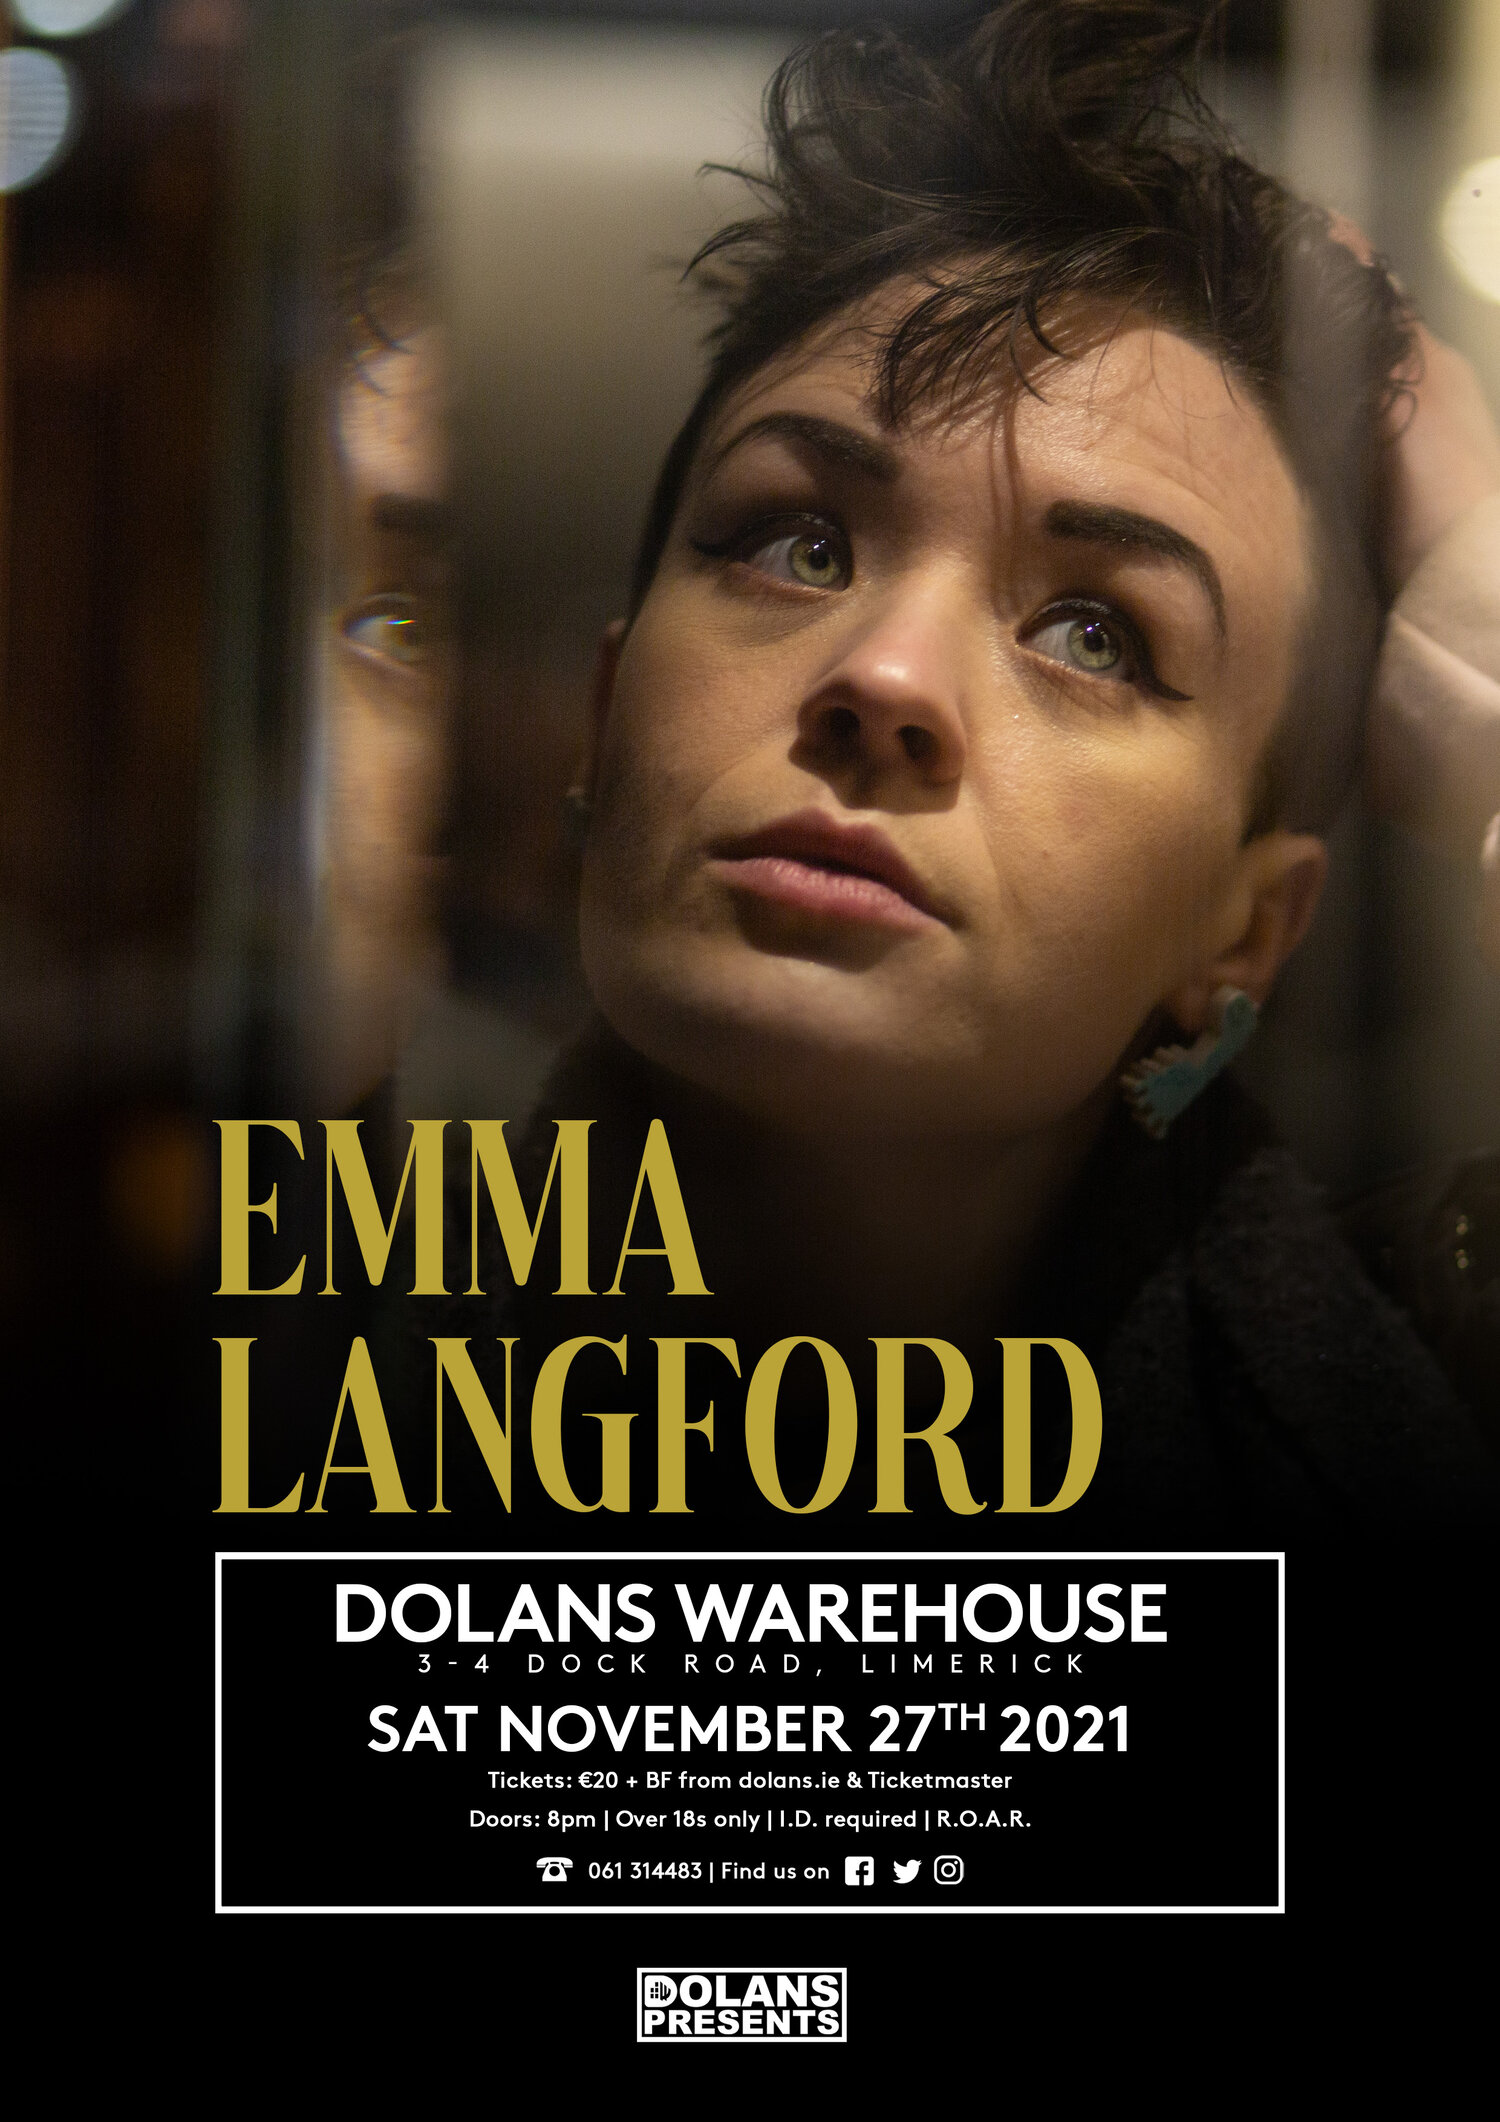 emma langford dolans gig "We are delighted to be welcoming Emma back to Dolan's, as she is set to play the Warehouse on November 27," commented Dolan's.